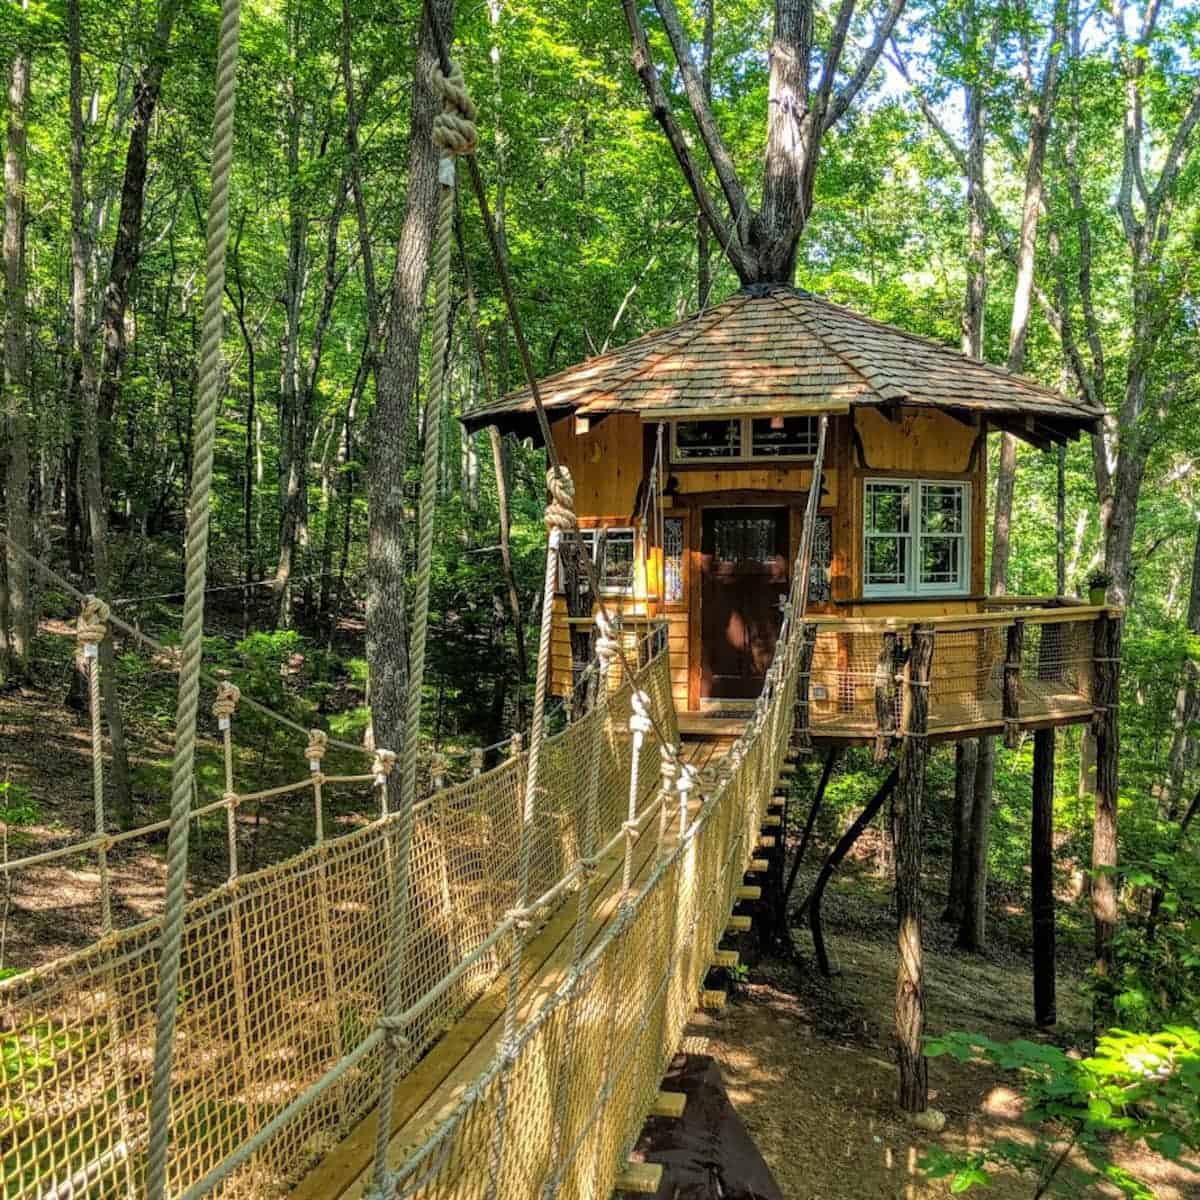 Image of treehouse rental in Tennessee